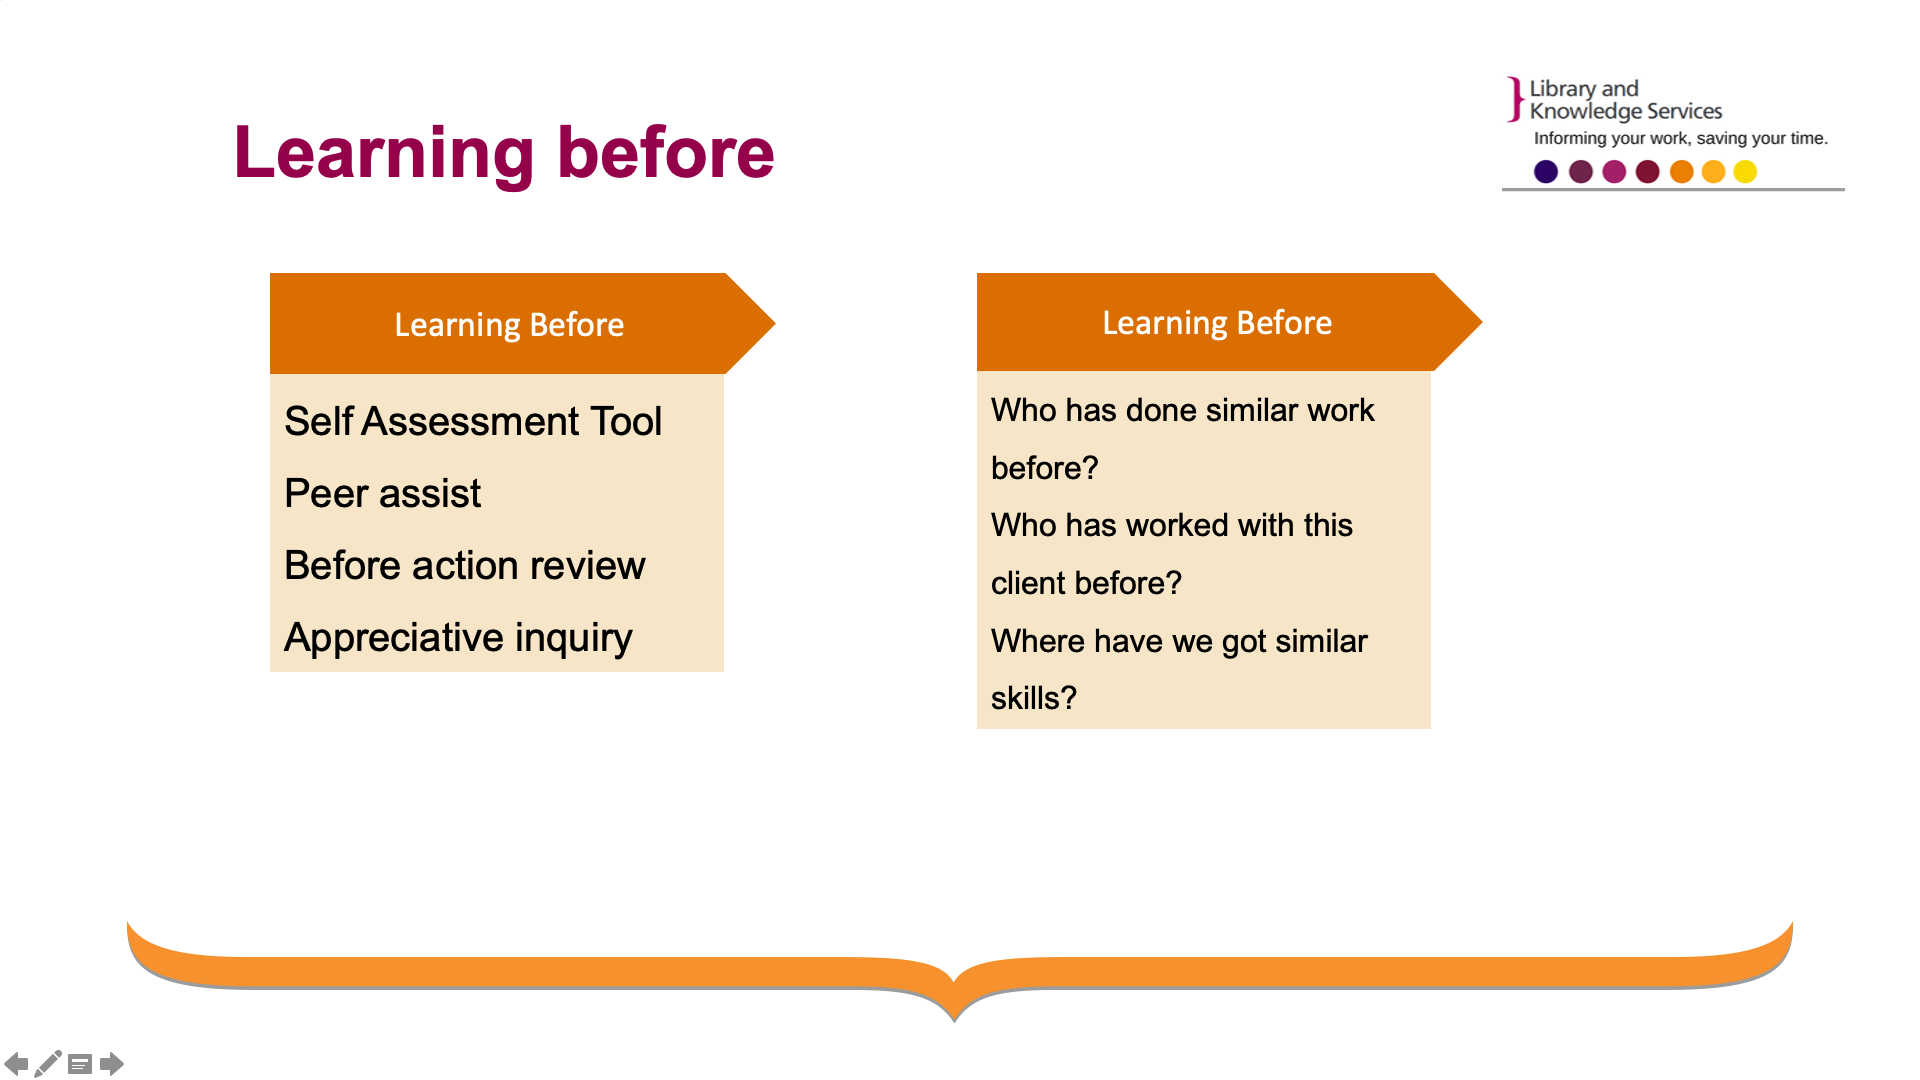 Slide 3: Here is a close up on the 'learning before' section (with Self-assessment tool, peer assist, before action review, and appreciative enquiry underneath it). This corresponds to the three questions that should be asked during this process 'who has done similar work before?', 'who has worked with this client before?', and 'where have we got similar skills?'